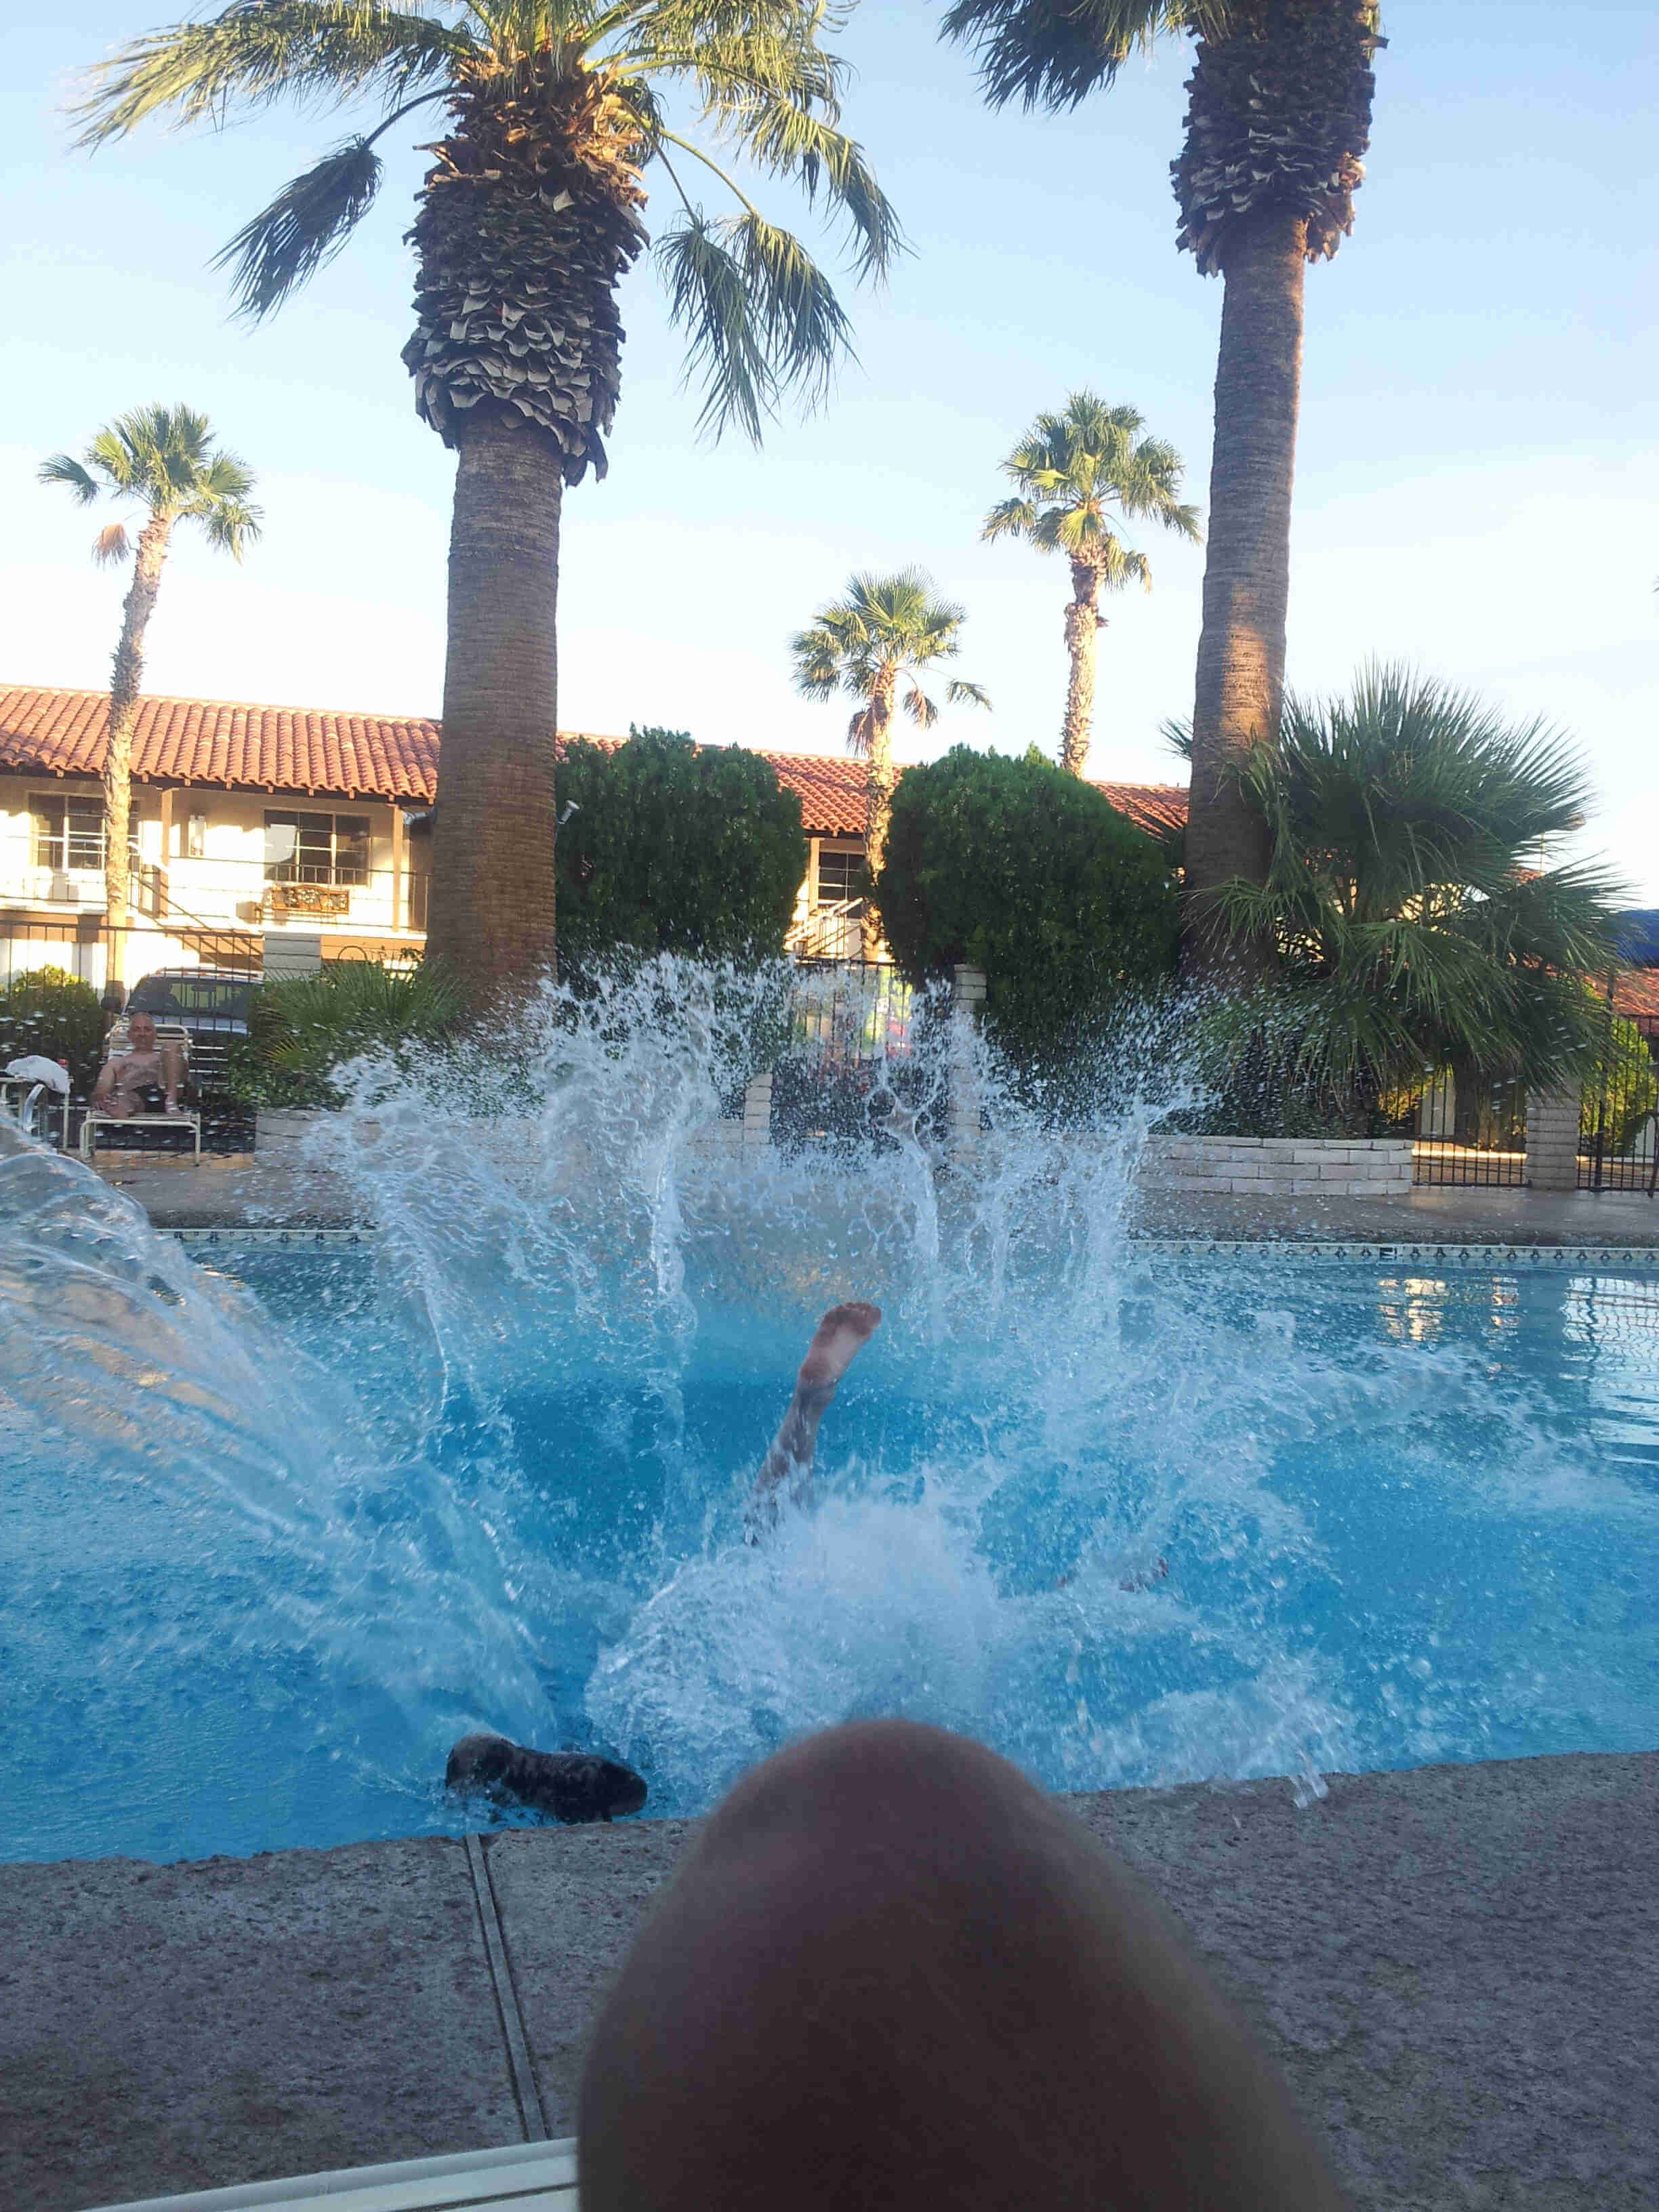 A person splashing into an outdoor pool with palm trees around it, with a motel in the background